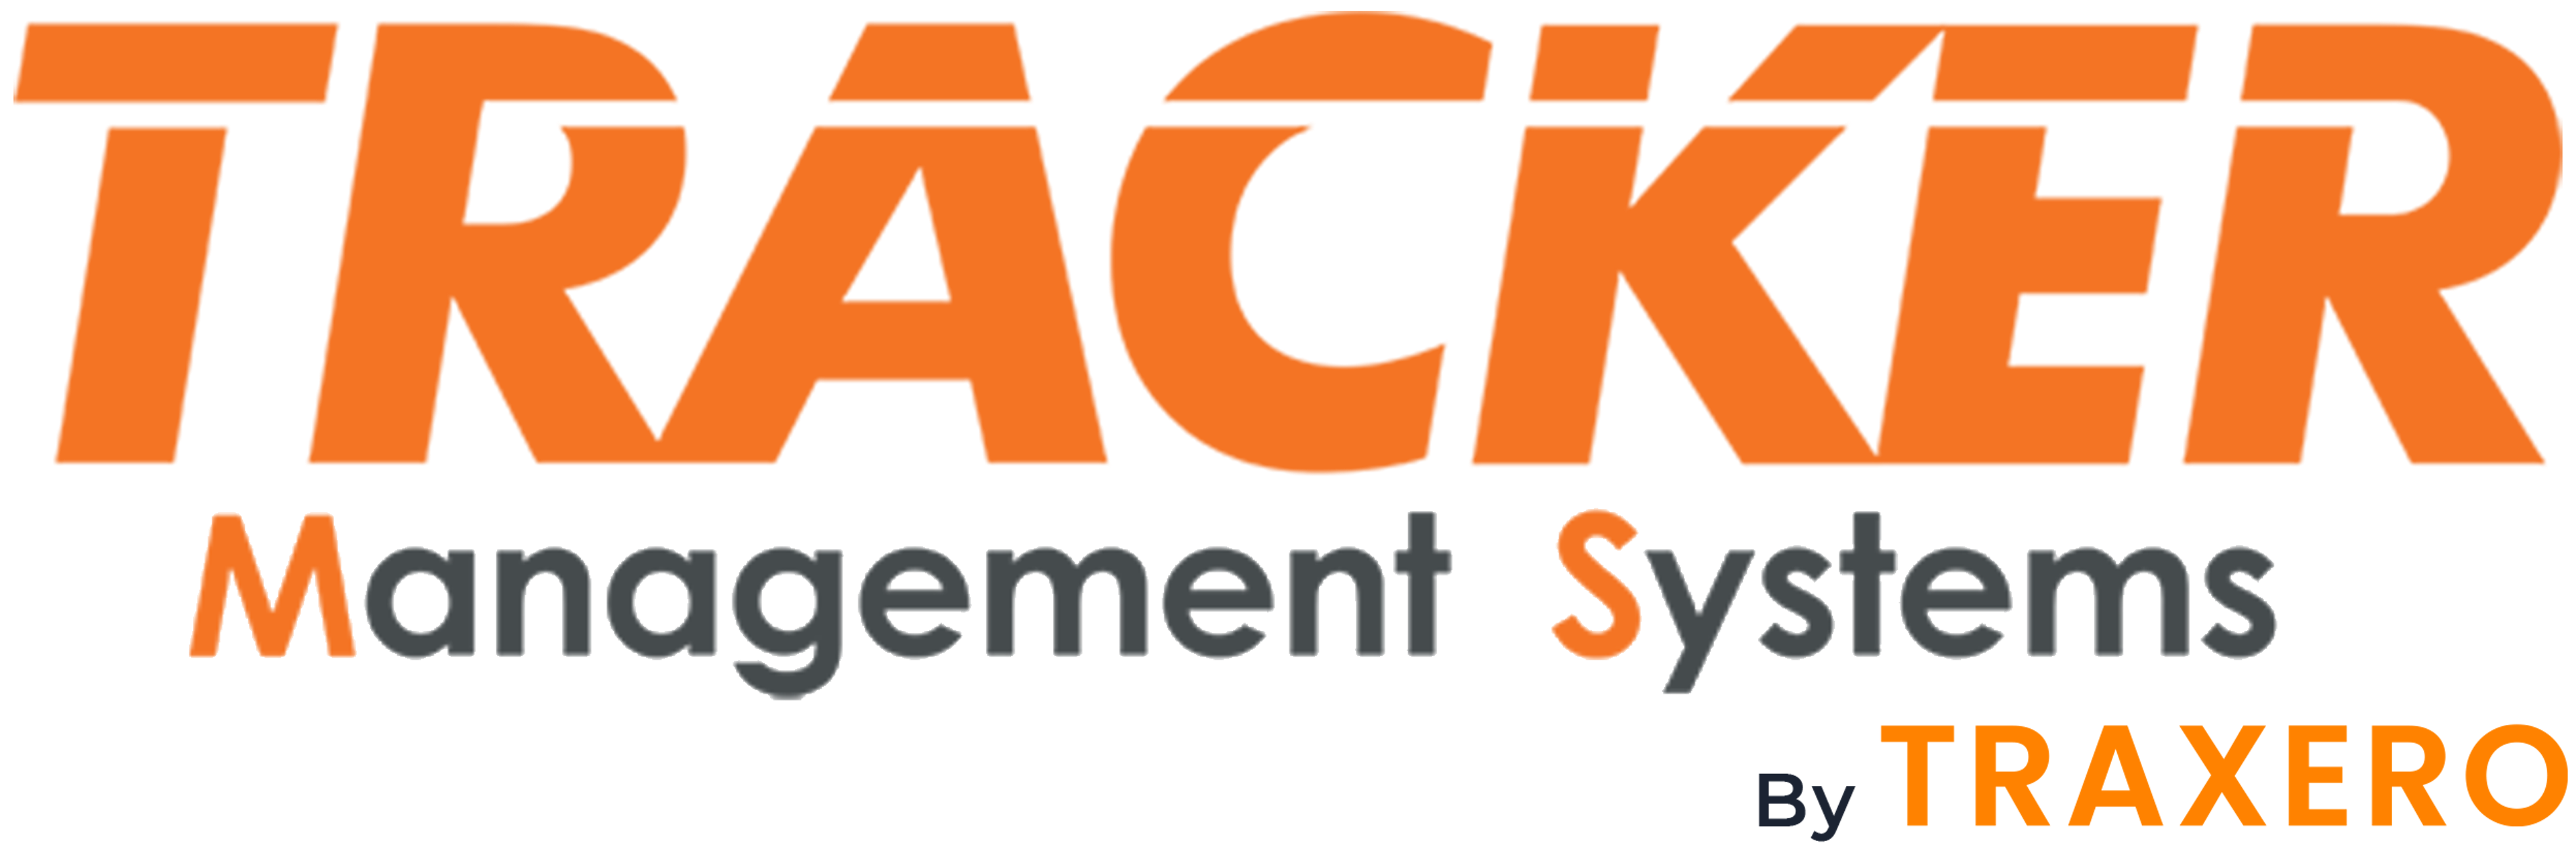 Tracker Management Systems Logo